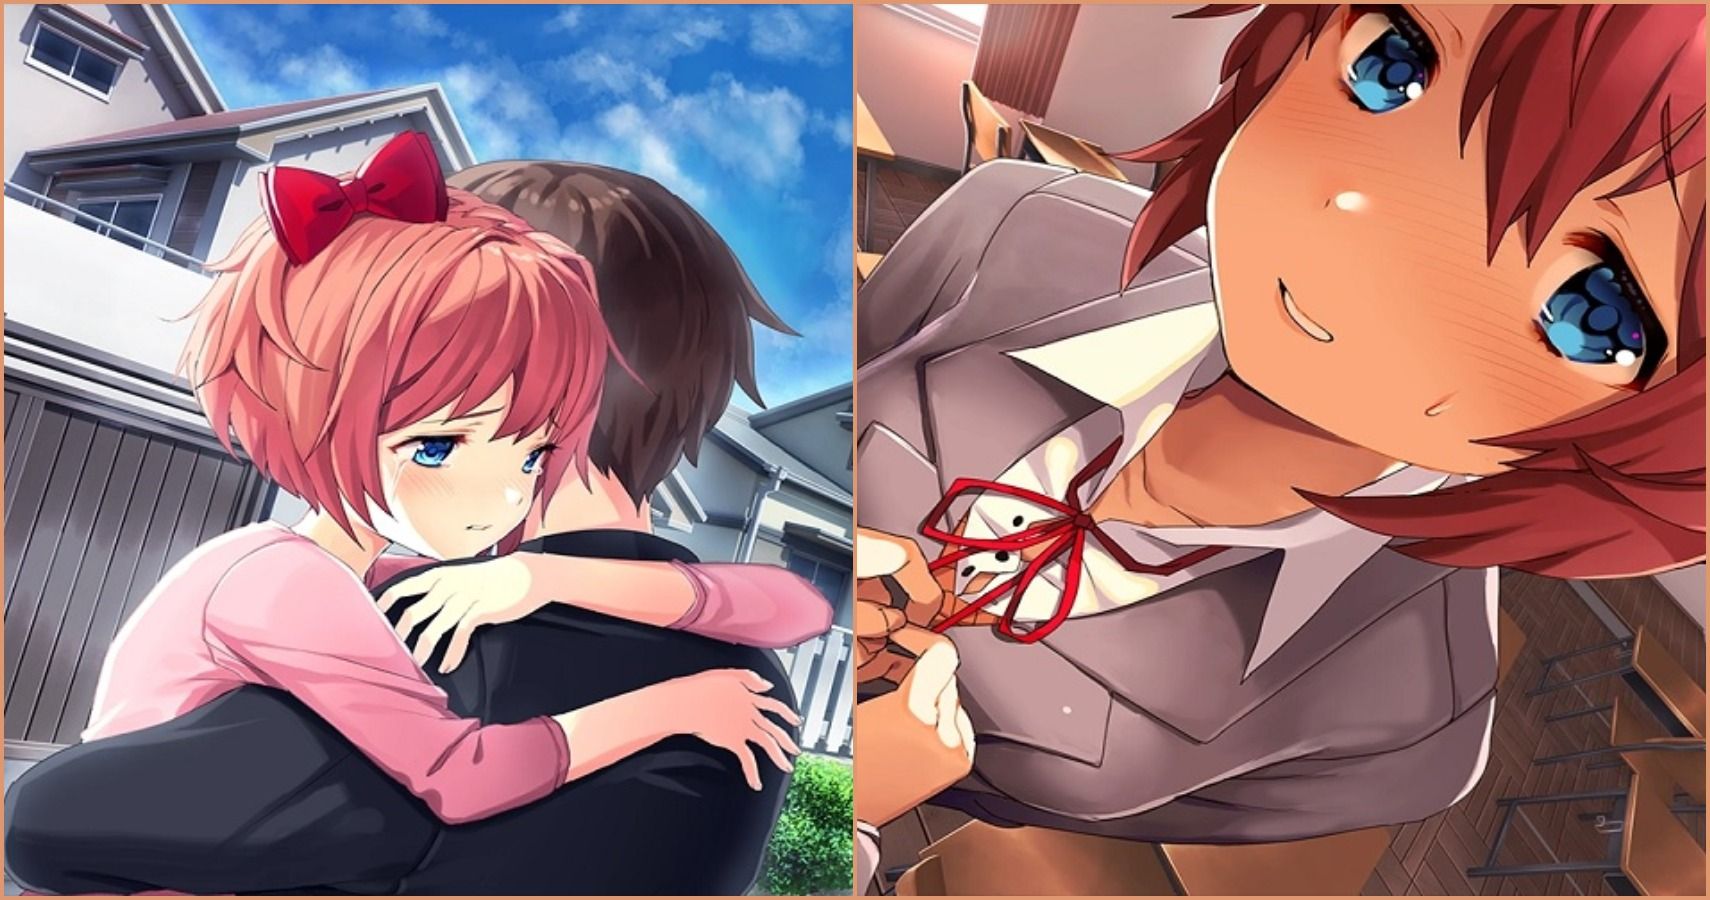 𝐃𝐝𝐥𝐜 𝐠𝐢𝐫𝐥𝐬 • | Anime, Anime outfits, Literature club